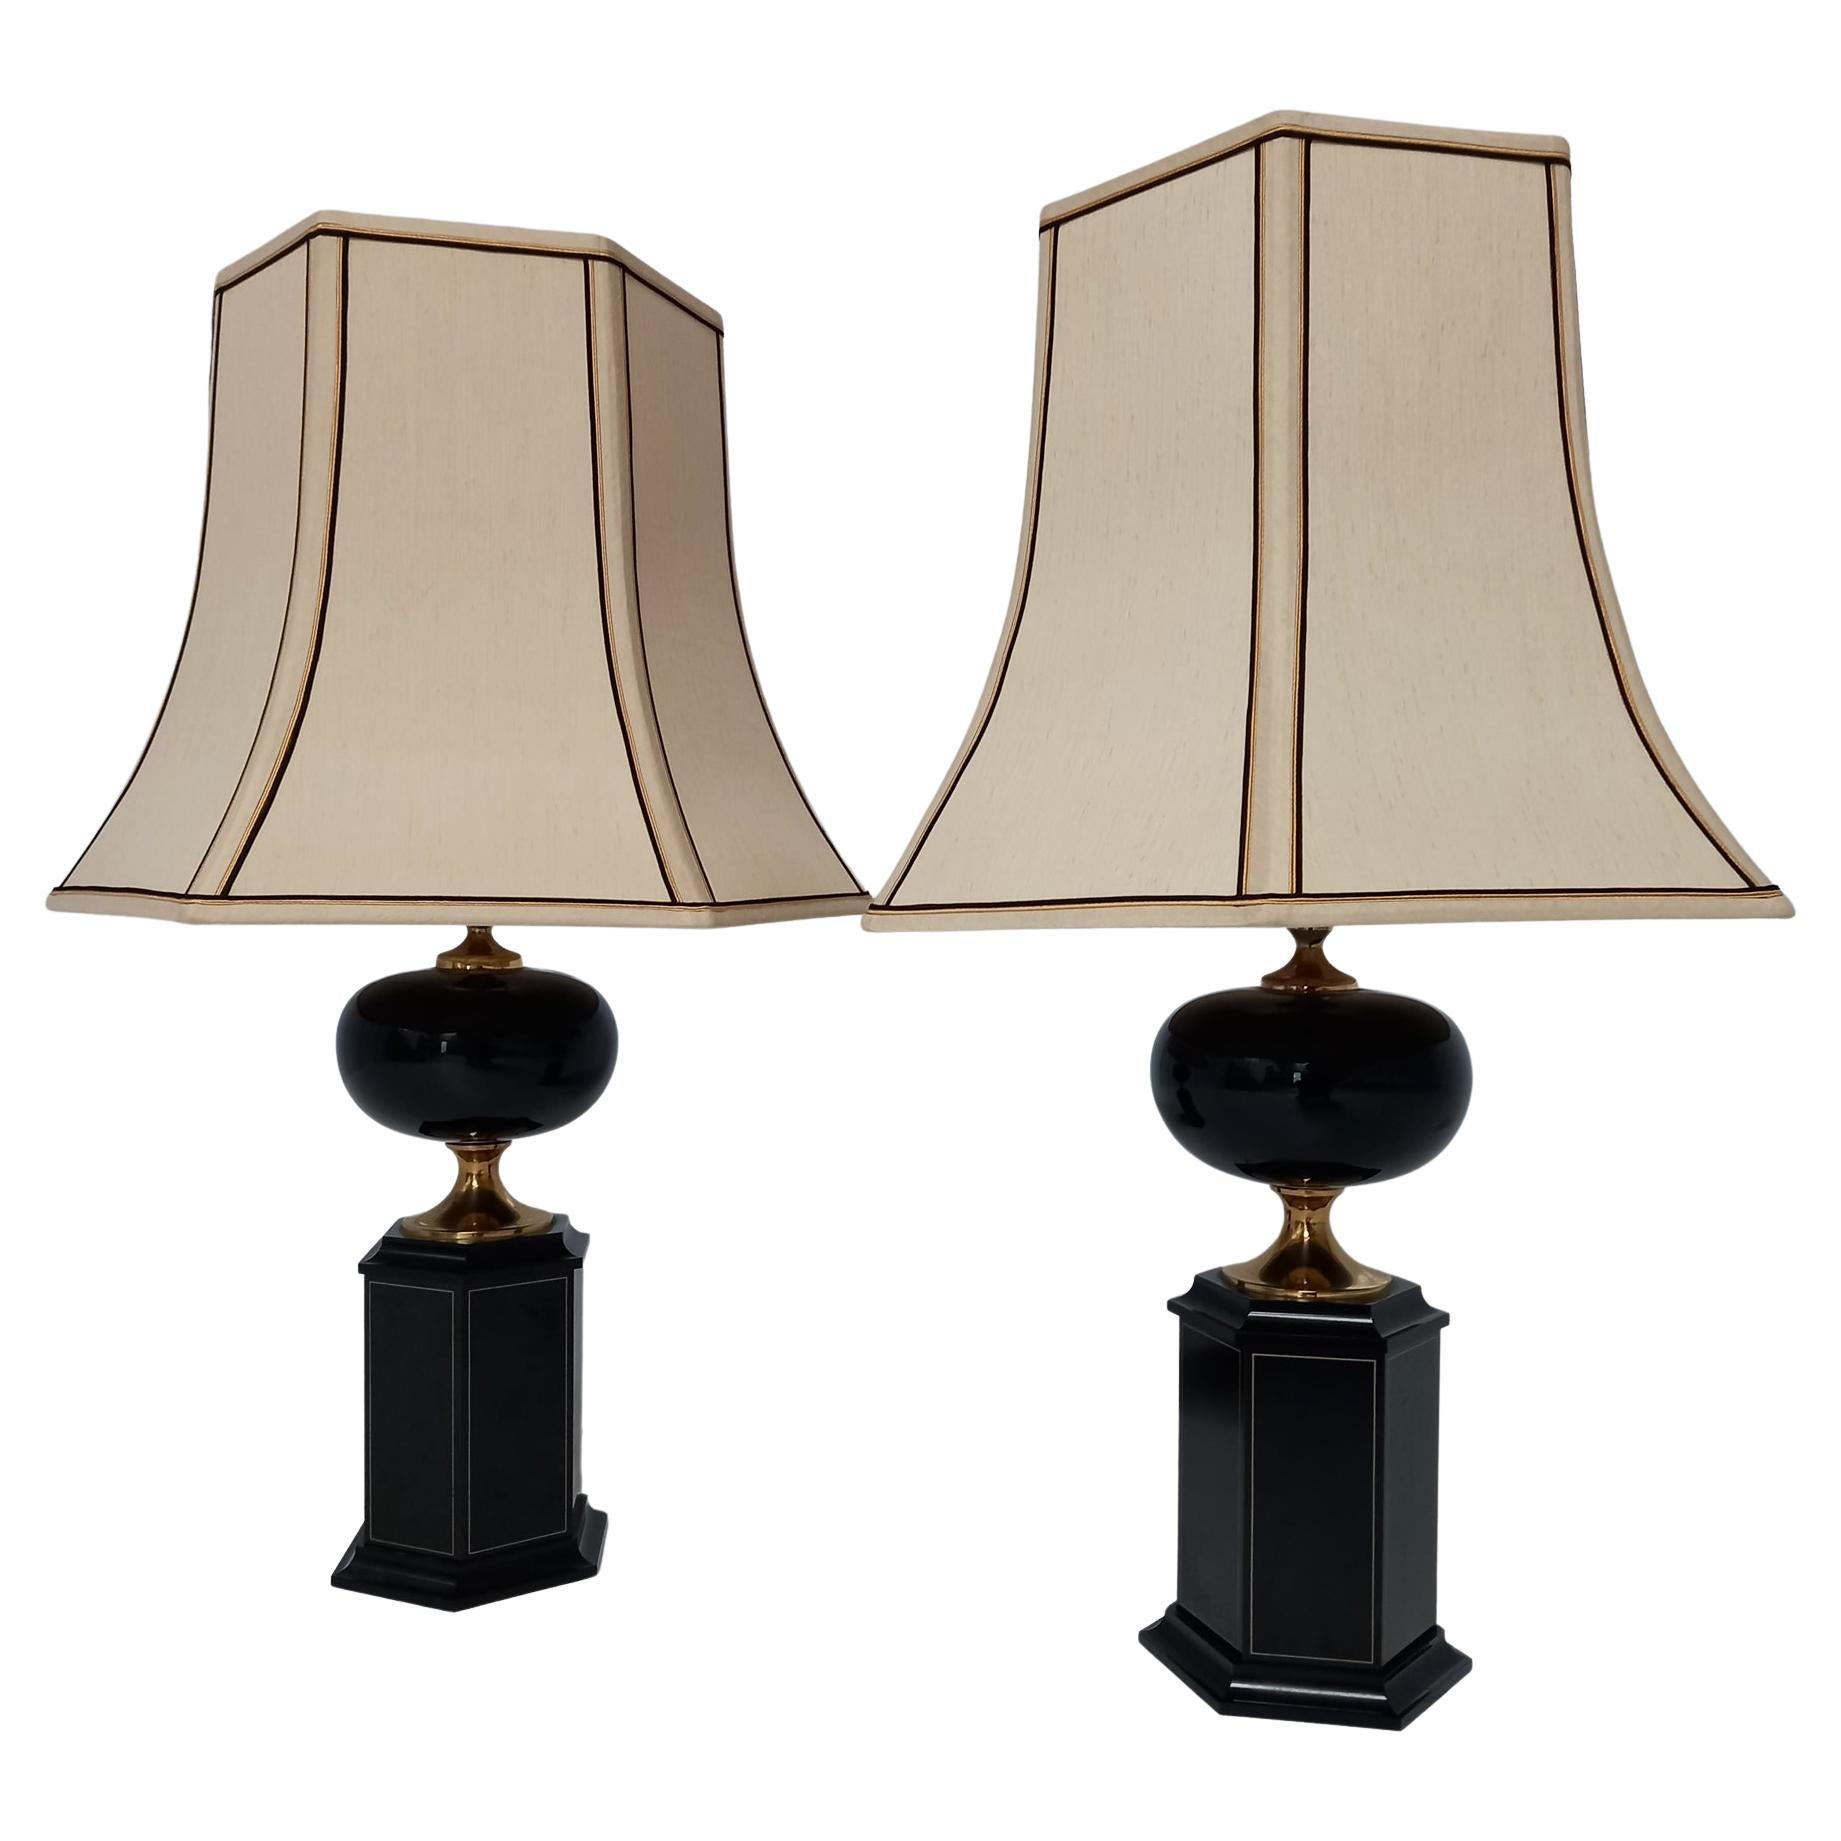 Oversized Maison le Dauphin table lamps, very elegant dark burgundy enamelled with some gold trim on the bases and with brass finishes. - France 1970s. 
Stunning and original lamp shades with gold and black trims. A label is shown at the base of one